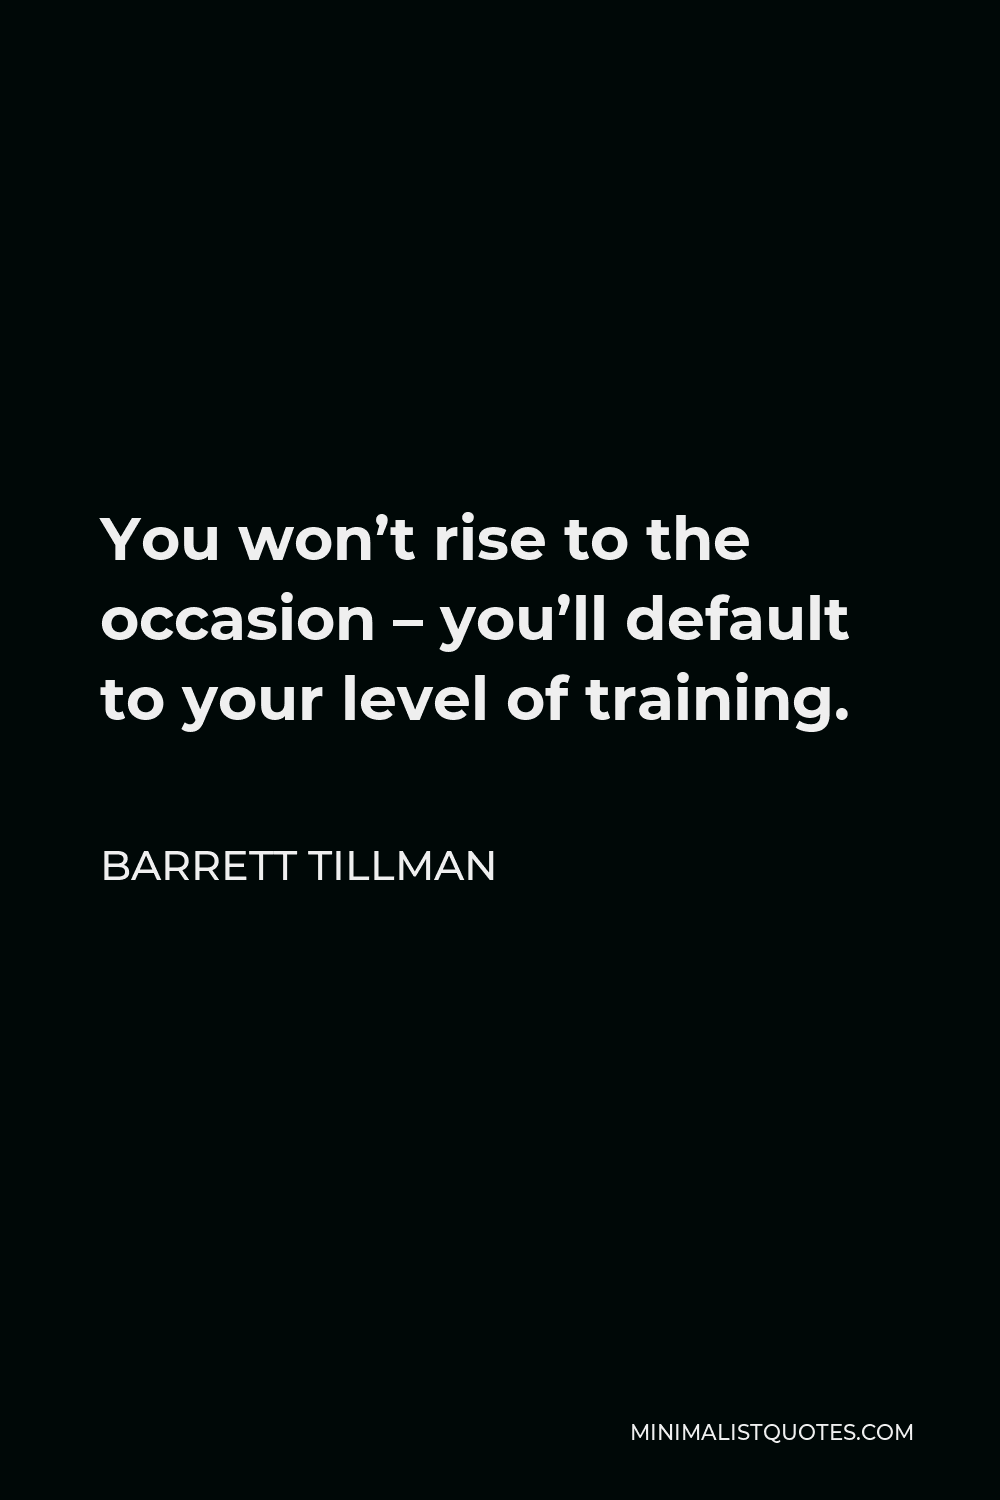 Barrett Tillman Quote - You won’t rise to the occasion – you’ll default to your level of training.